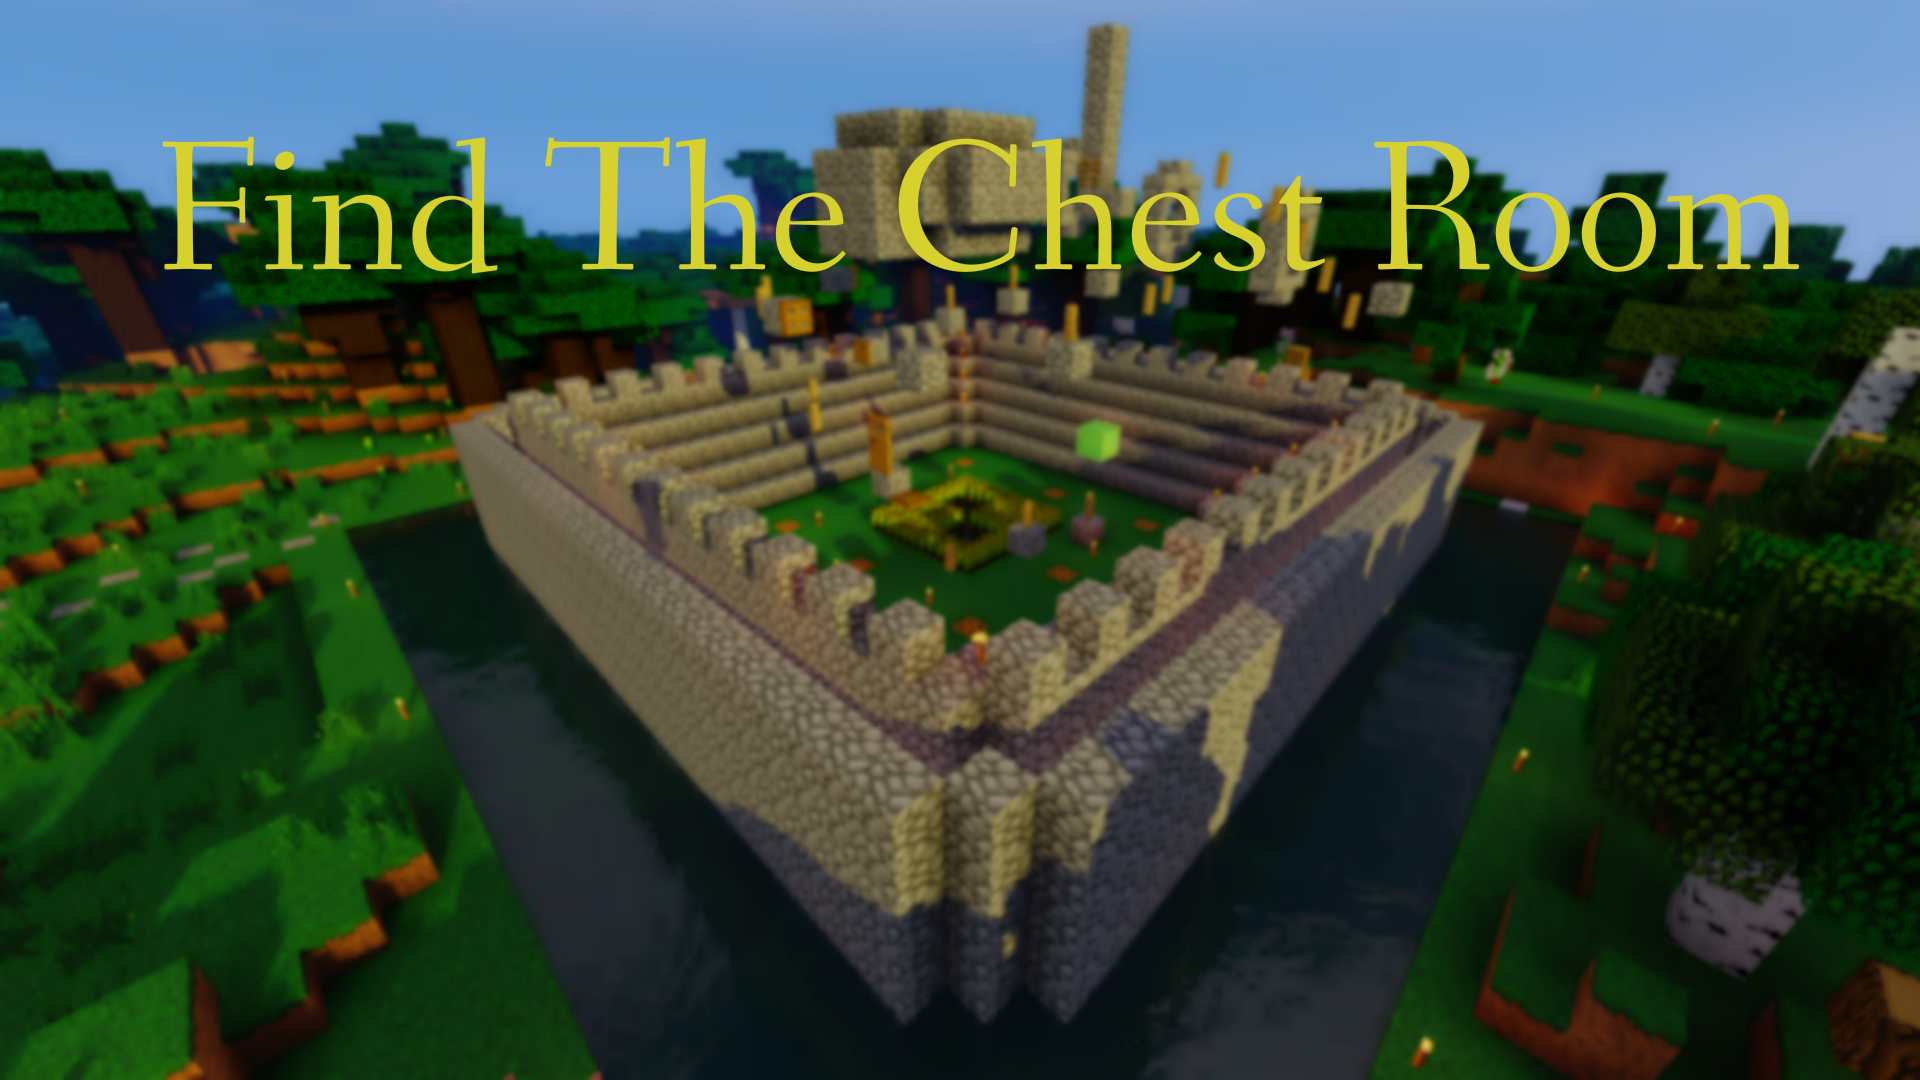 Find The Chest Room miniature.jpg